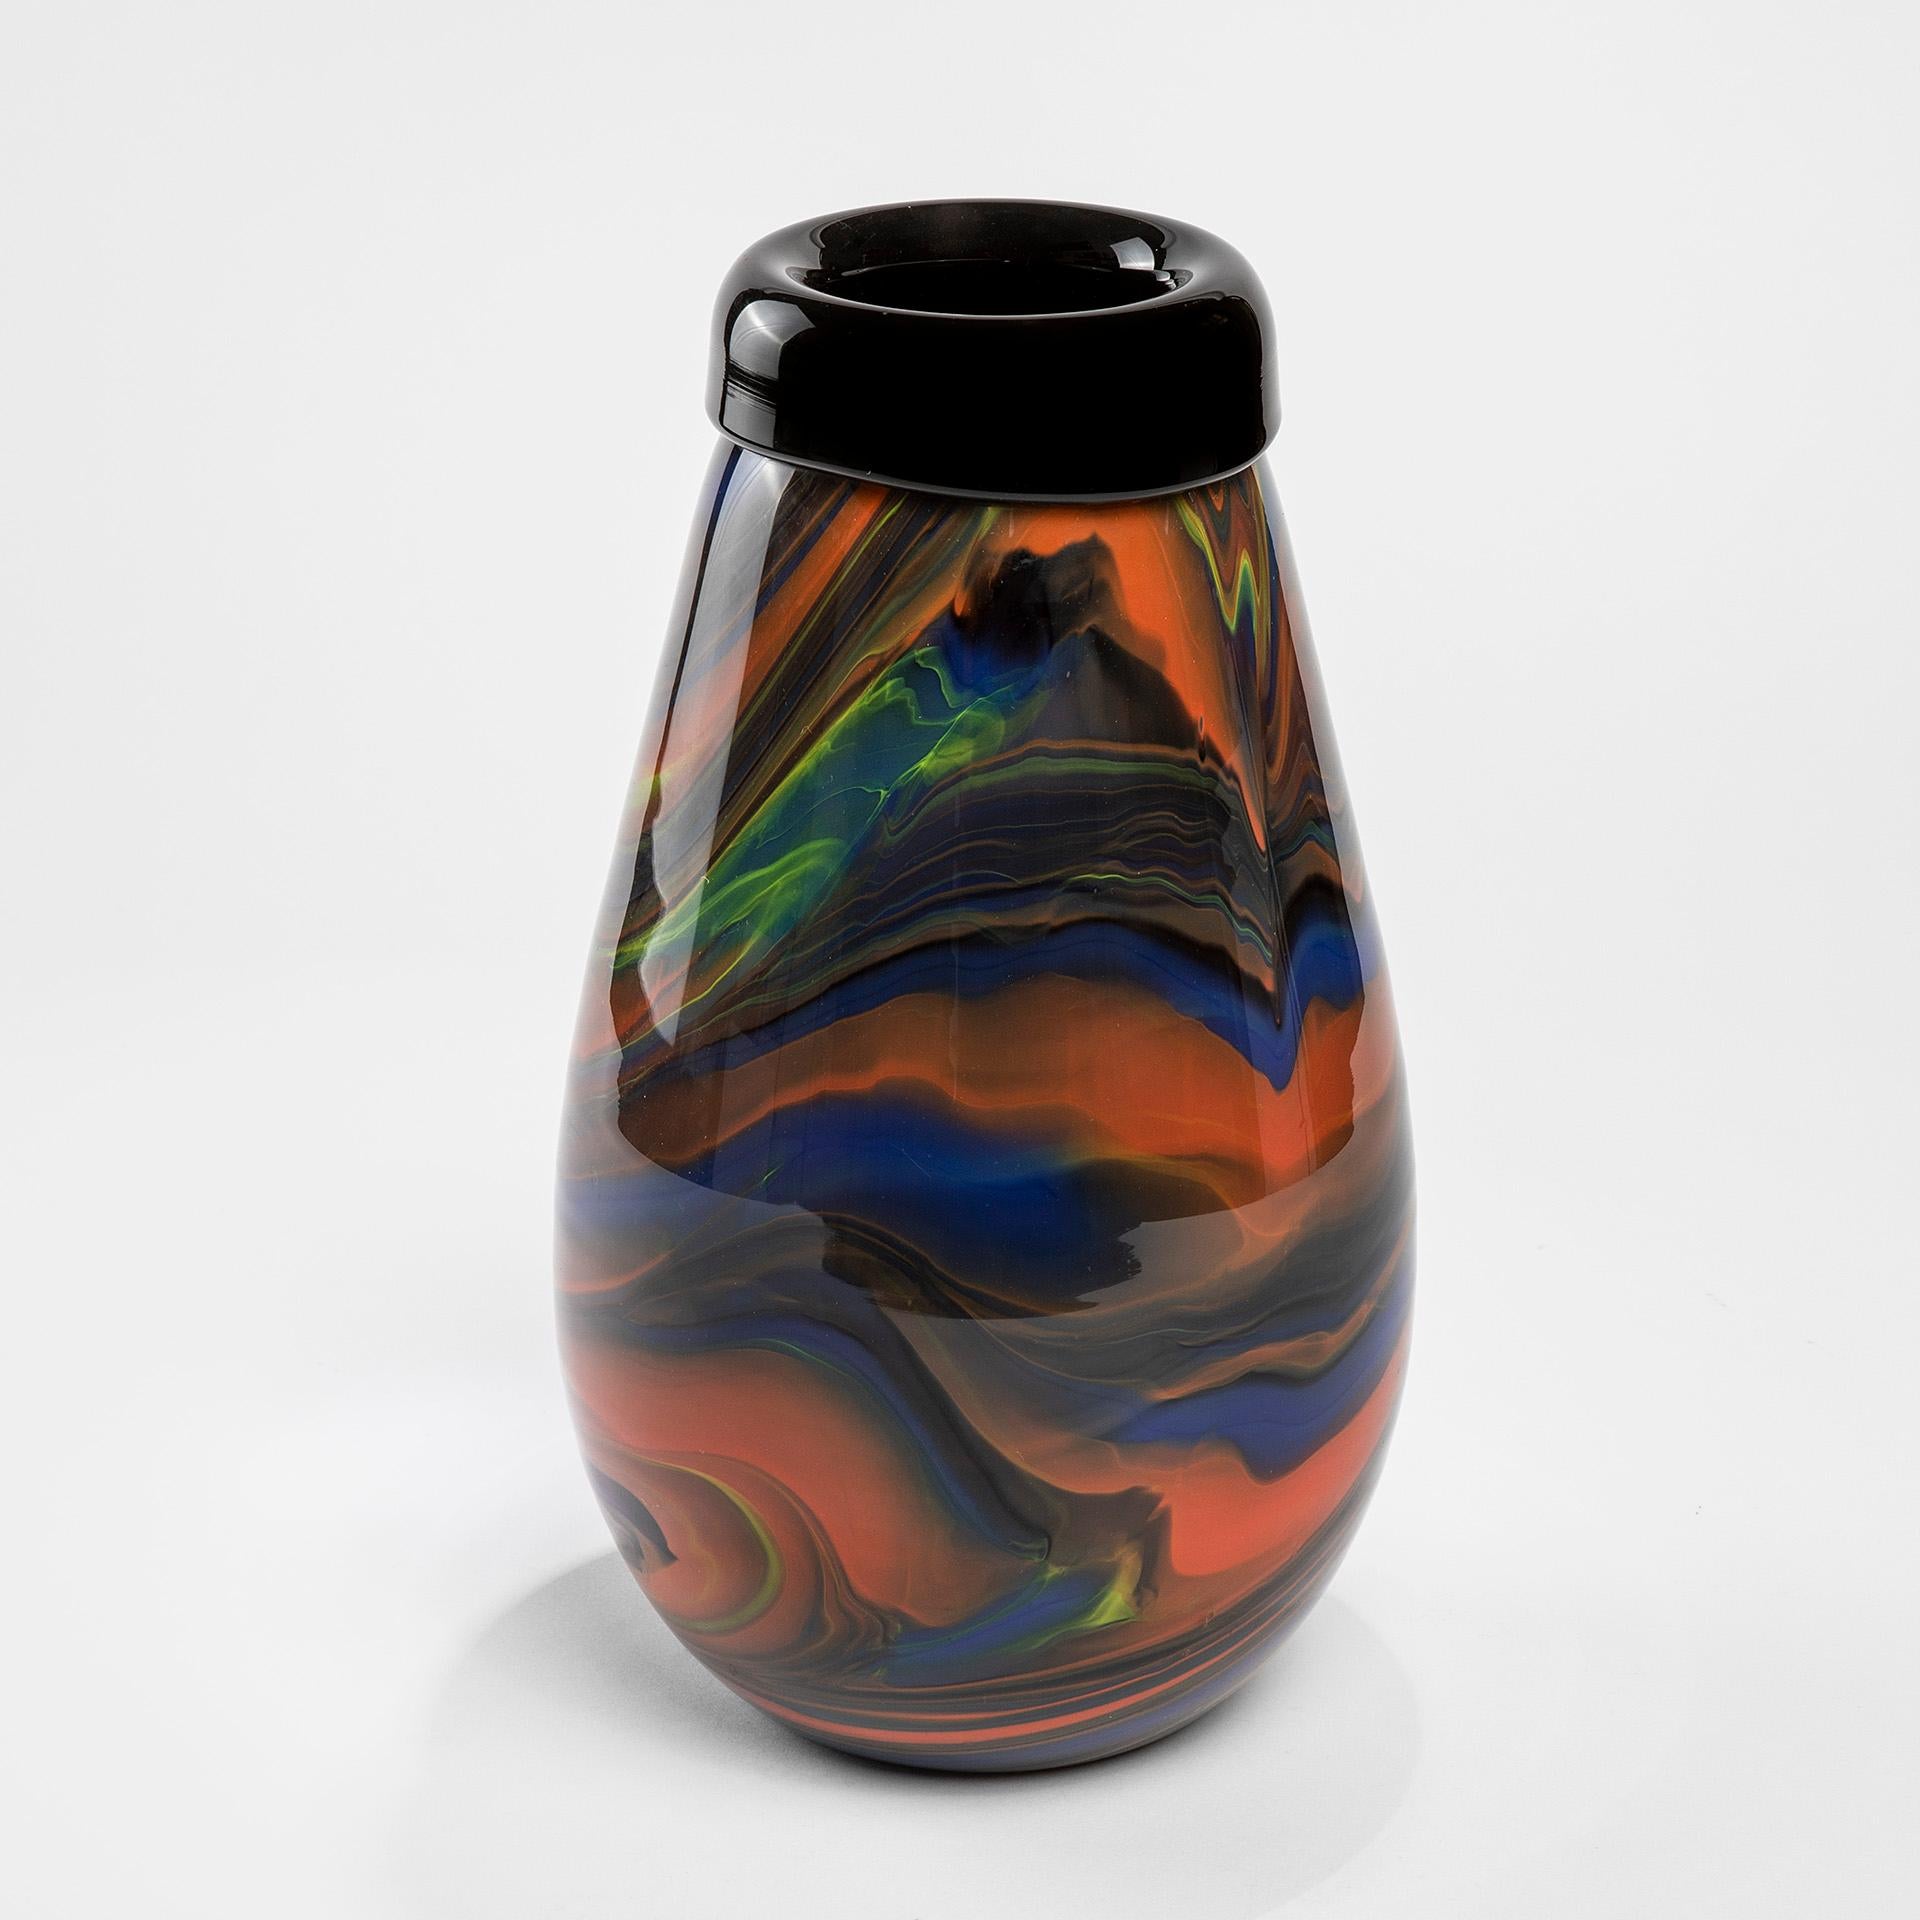 Missoni is a famous italian fashion brand founded in 1953 and known for its clothing all around the world. During the 80s it coworked with Arte Vetro Murano in order to realize a serie of vases made in Murano glass.
Here we have a colored vase with